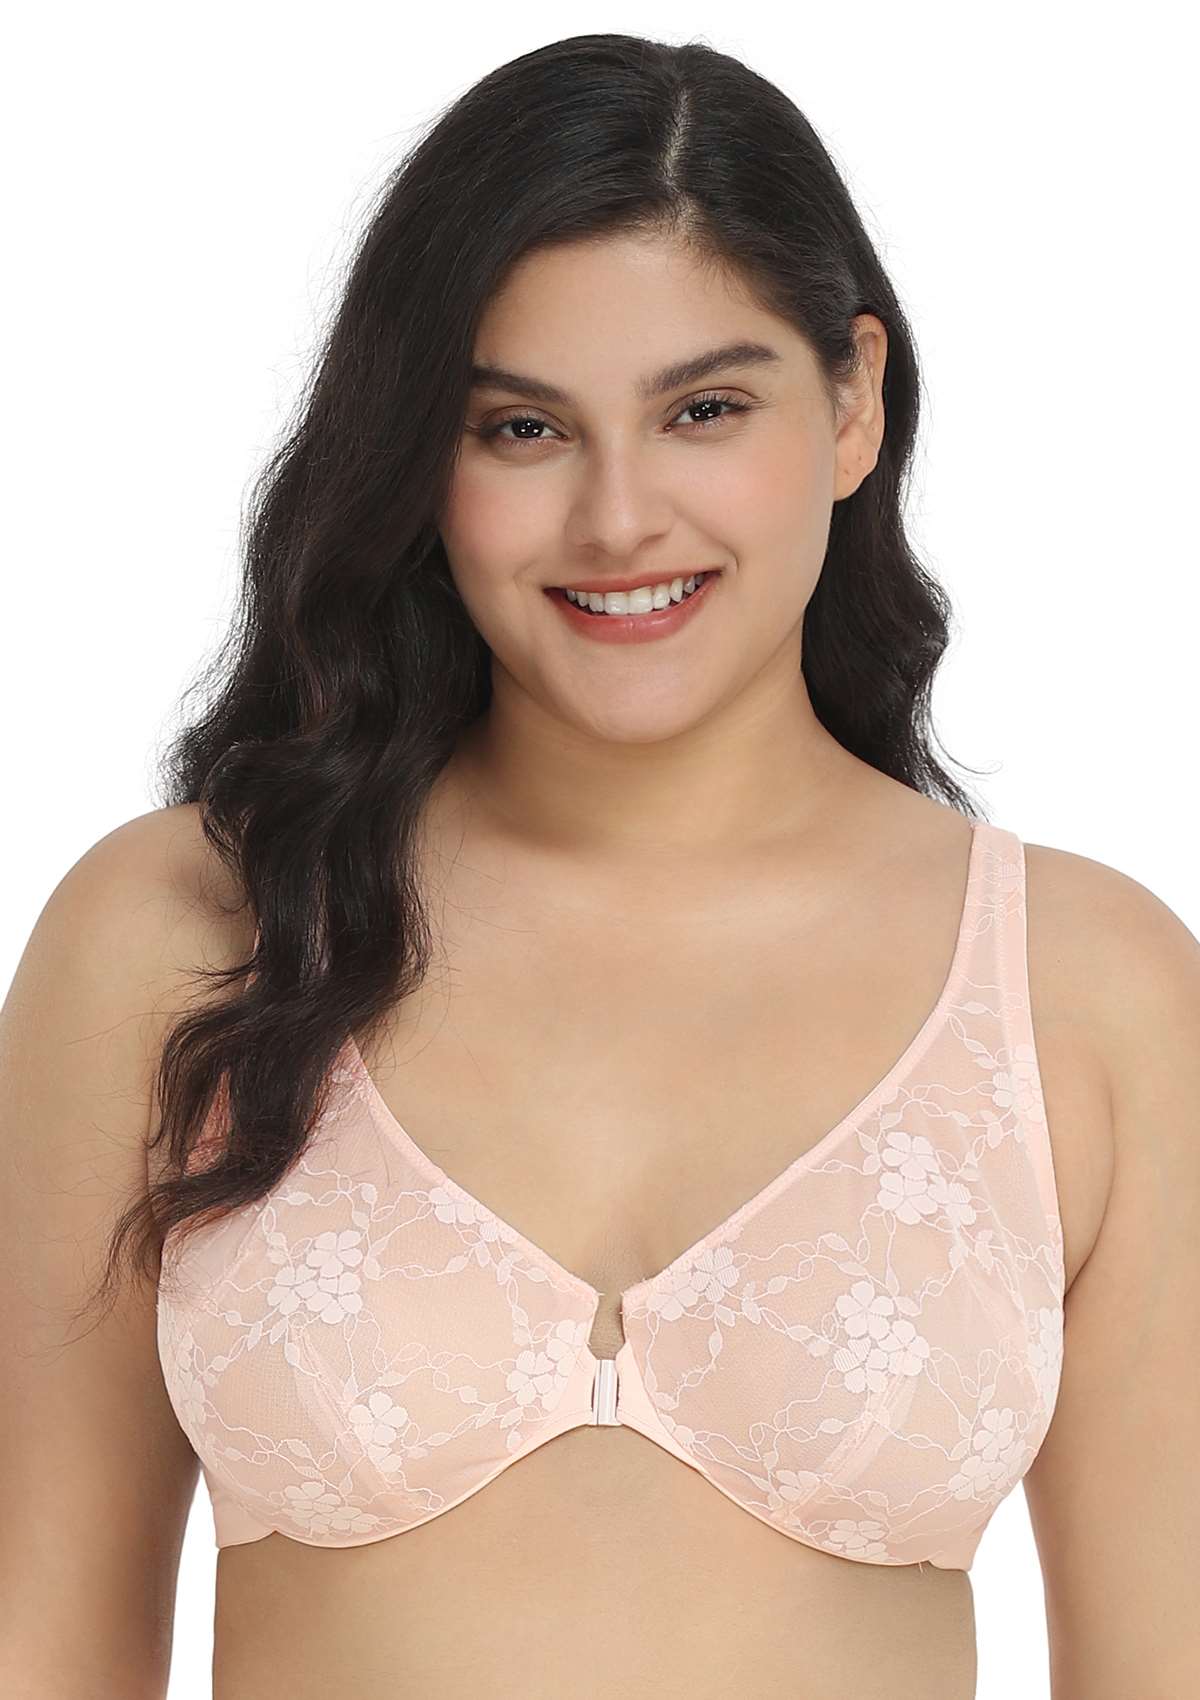 HSIA Spring Romance Front-Close Floral Lace Unlined Full Coverage Bra - White / 38 / H